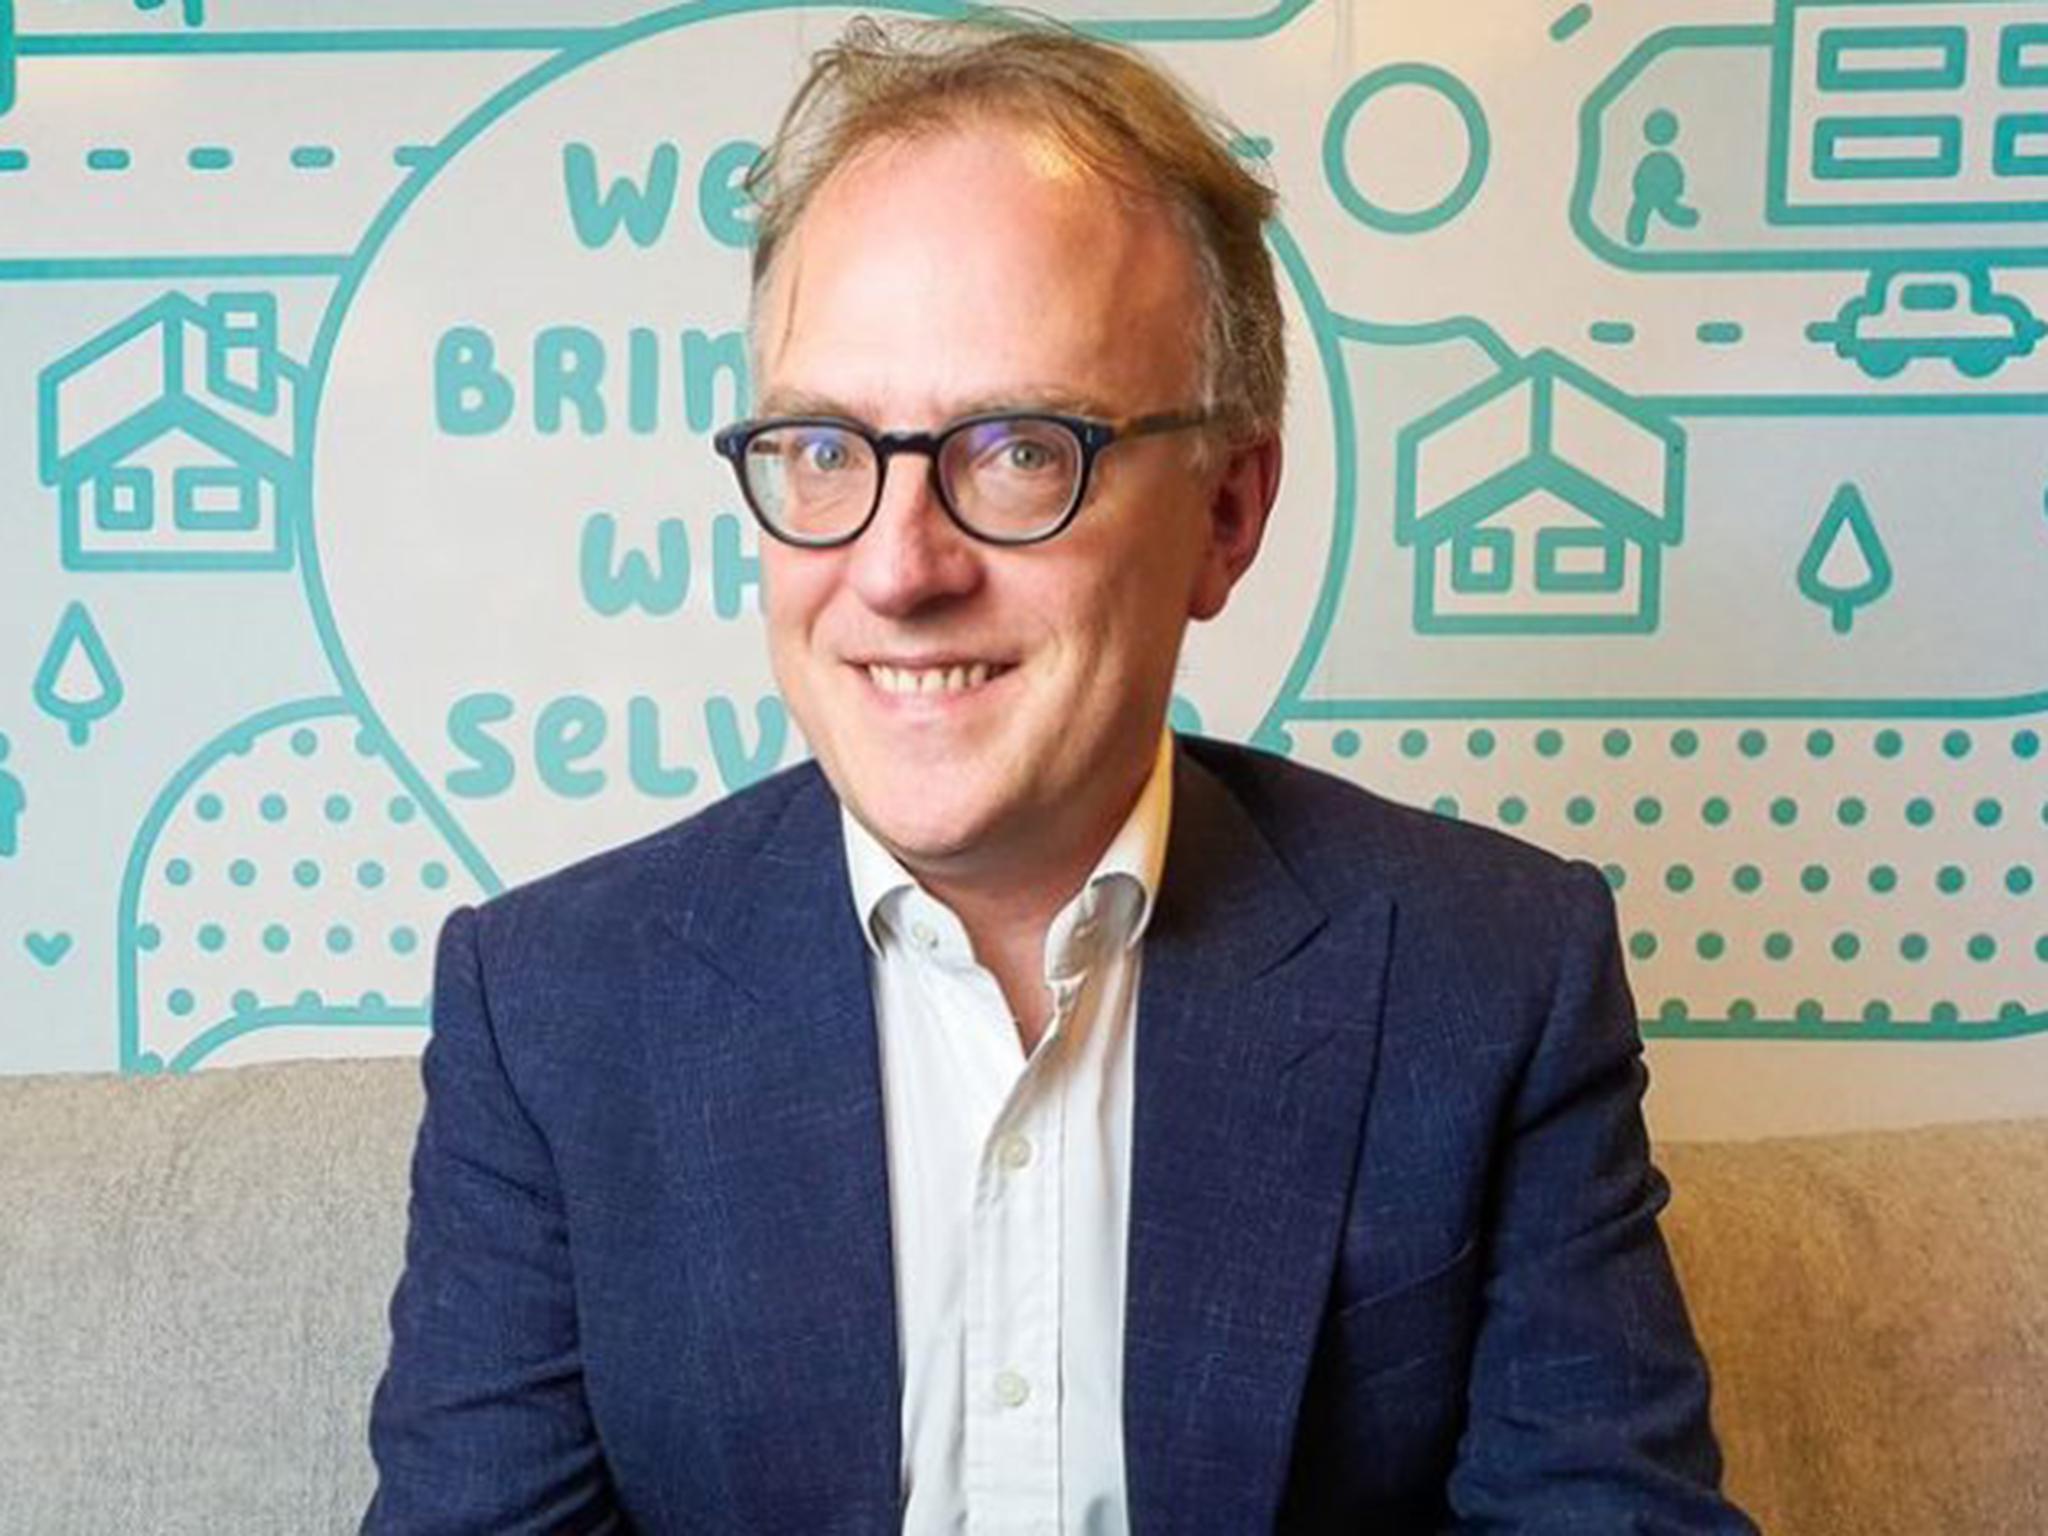 William Reeve wants to take the strain out of renting by making it digital